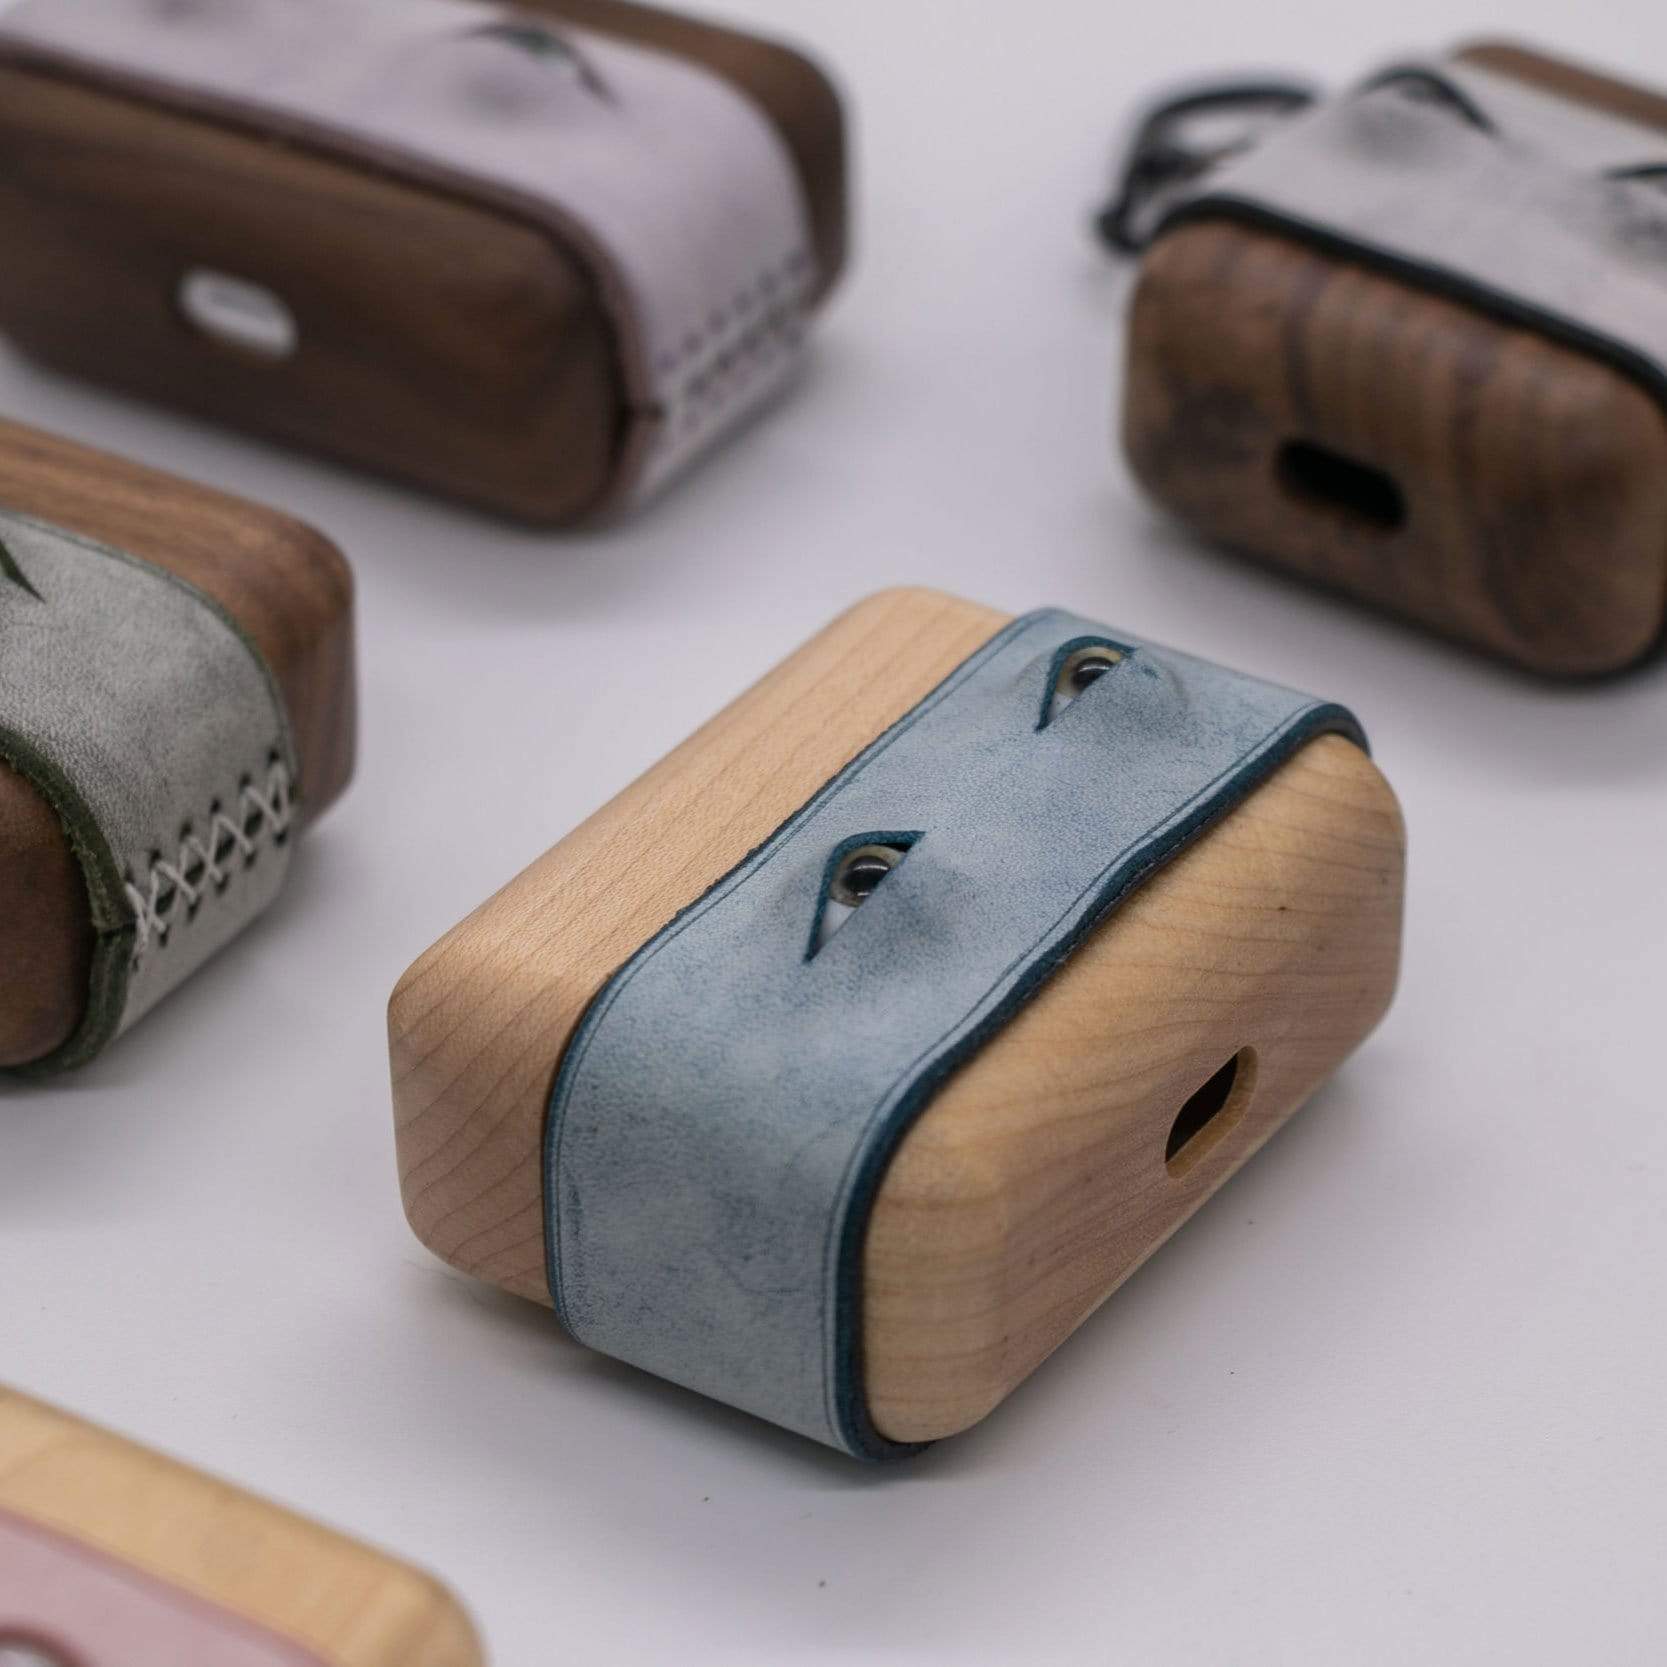 techypopcom AirPods Case Blue / Airpods 1 & 2 The Grey Eyes Leather Dark Wooden Protective Case For Apple Airpods 1 & 2 & Pro